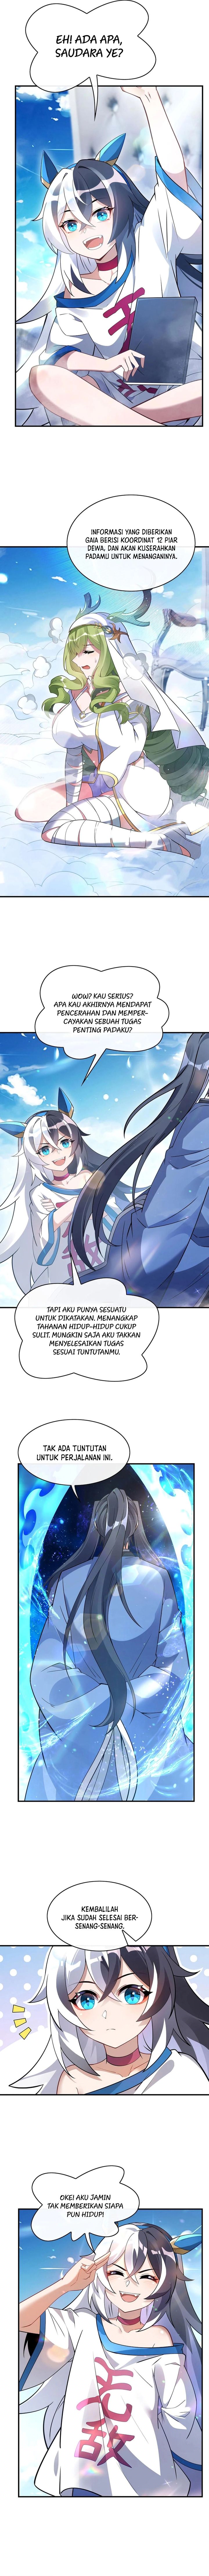 Dilarang COPAS - situs resmi www.mangacanblog.com - Komik my female apprentices are all big shots from the future 252 - chapter 252 253 Indonesia my female apprentices are all big shots from the future 252 - chapter 252 Terbaru 5|Baca Manga Komik Indonesia|Mangacan